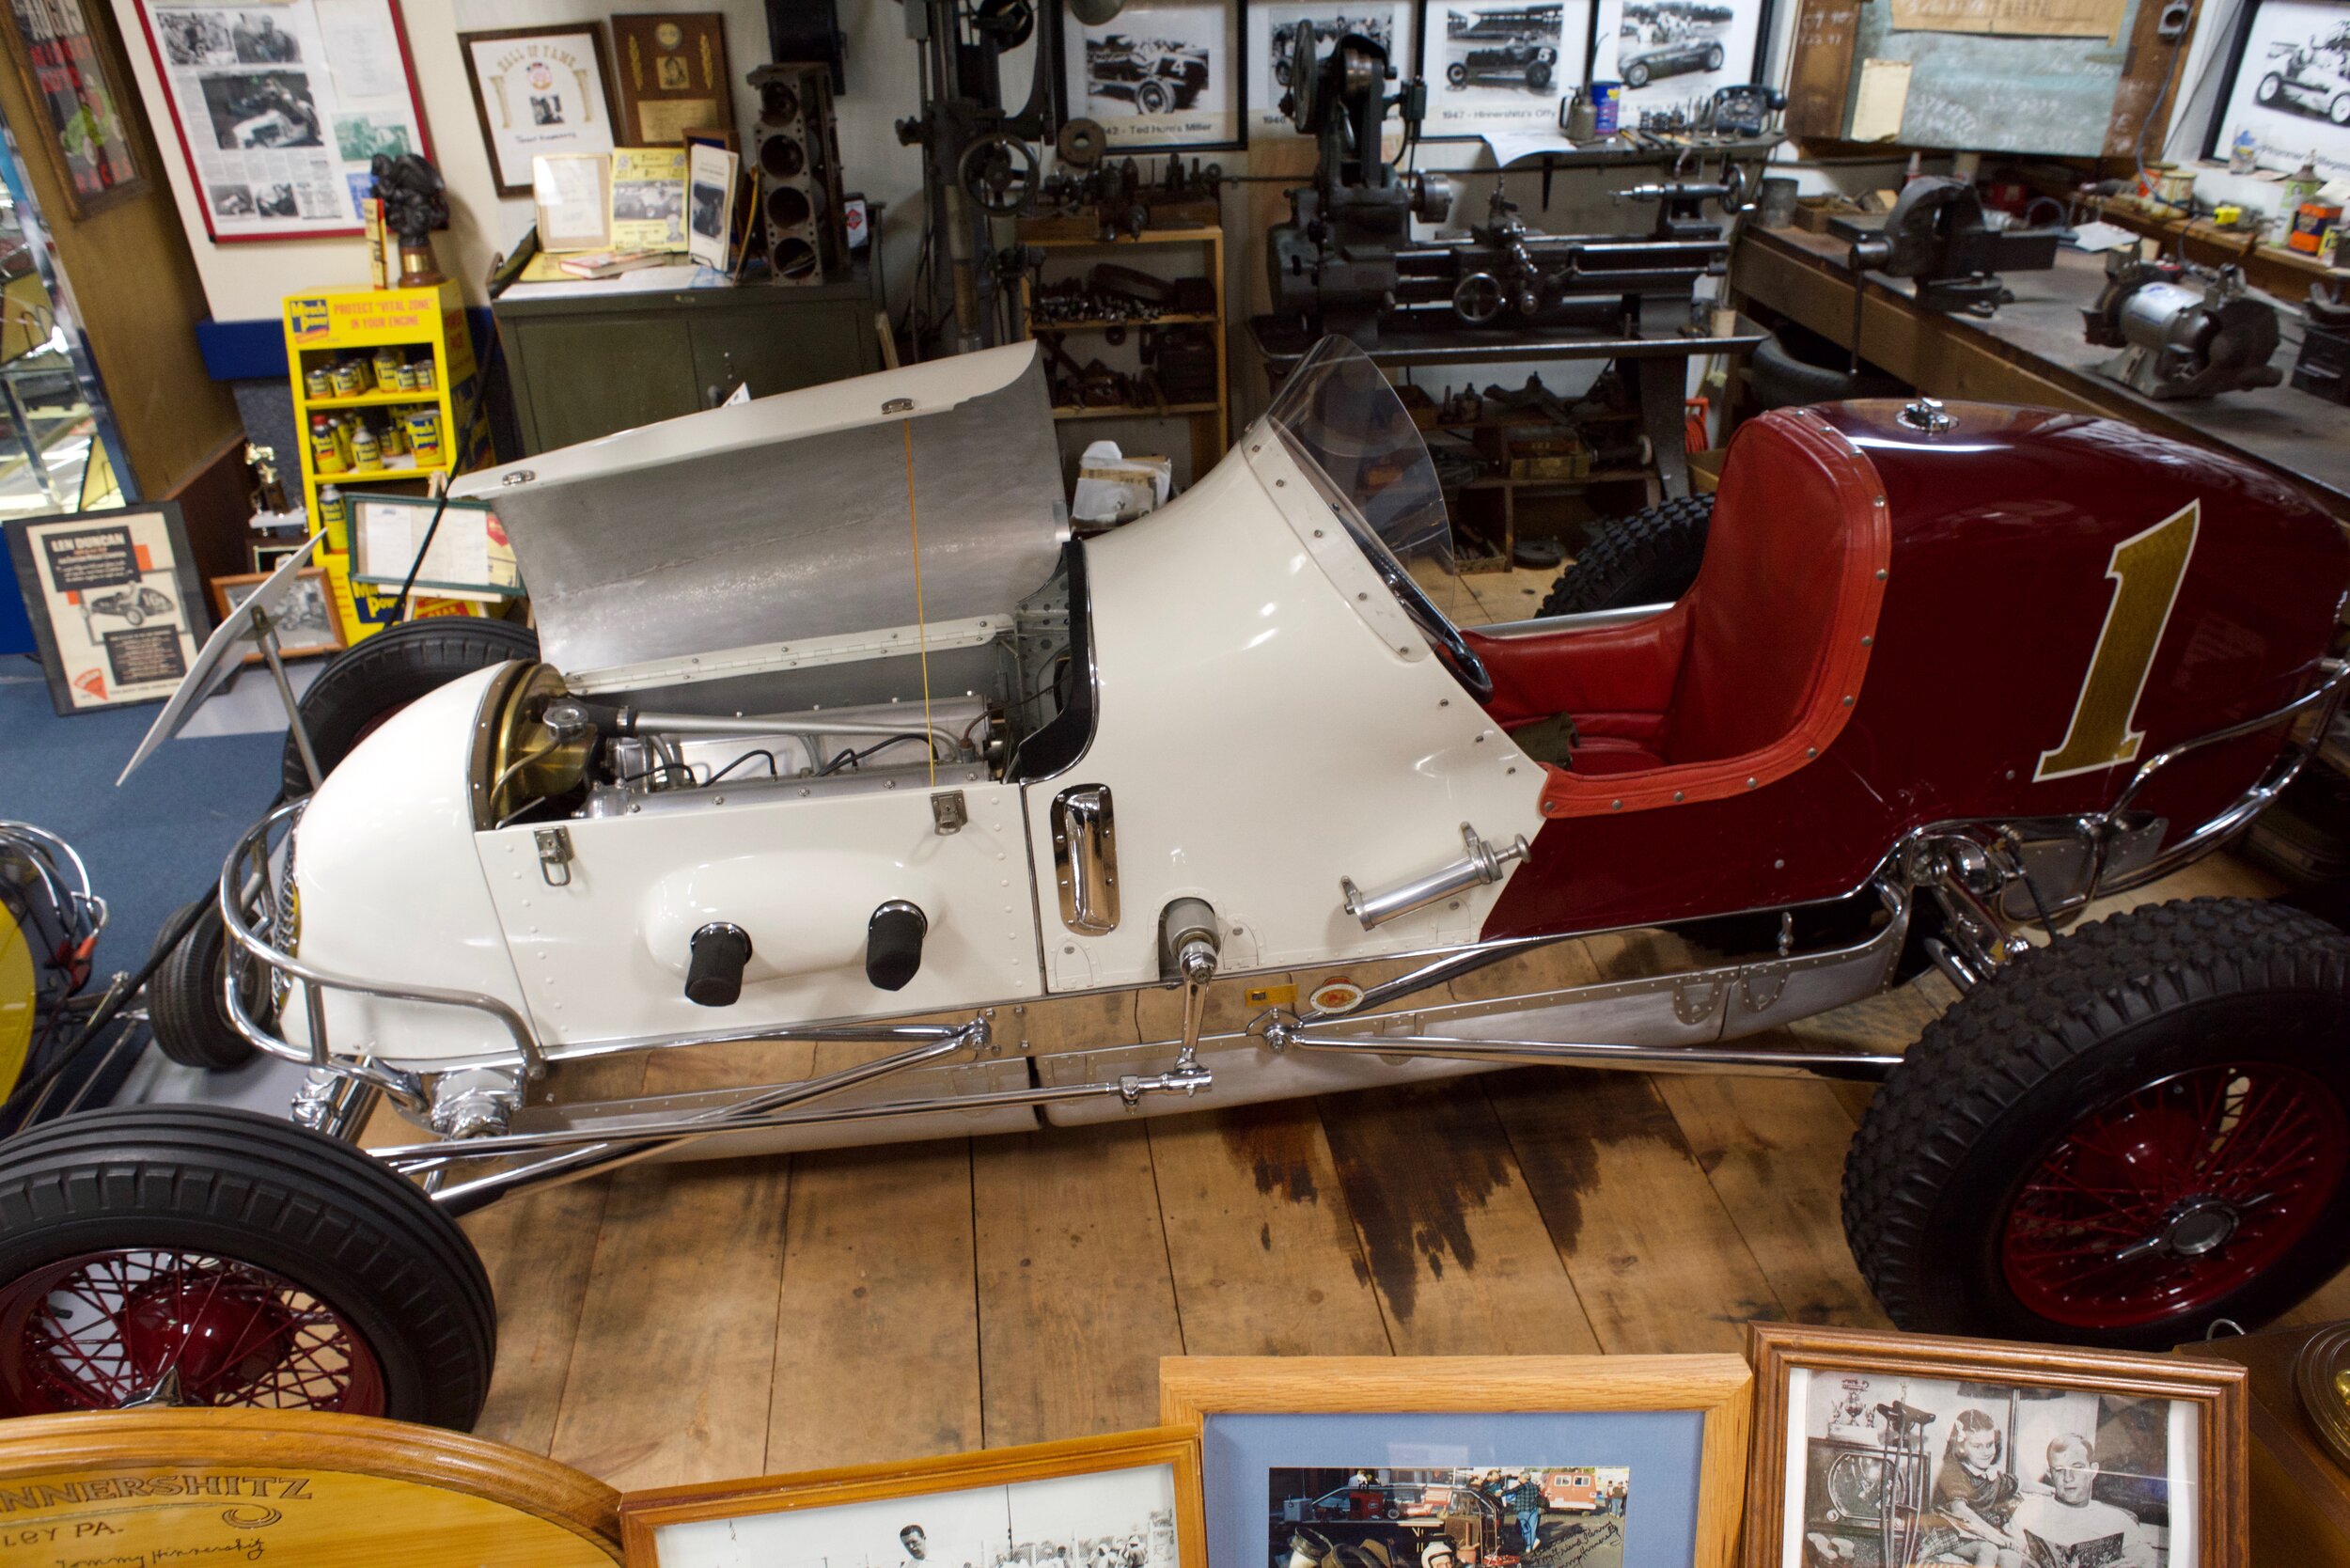  One of the museum’s most recent displays is Ted Horn’s beloved sprinter Baby. The car was built in 1938 by Harry “Hammers” Lewis for Horn who drove the car to 23 feature victories.  